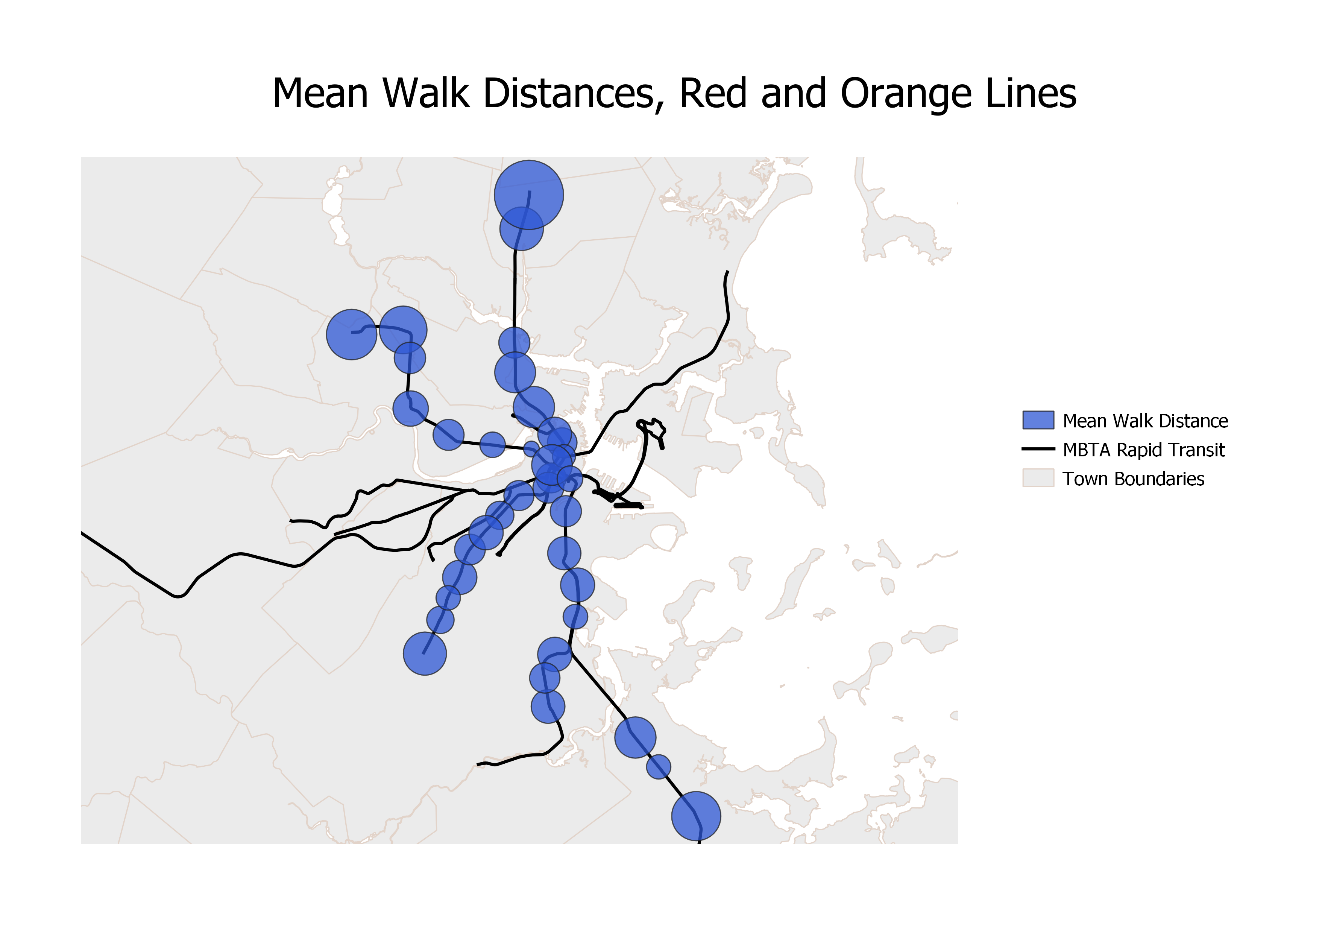 An image of the mean walk distances for the Red and Orange Lines.